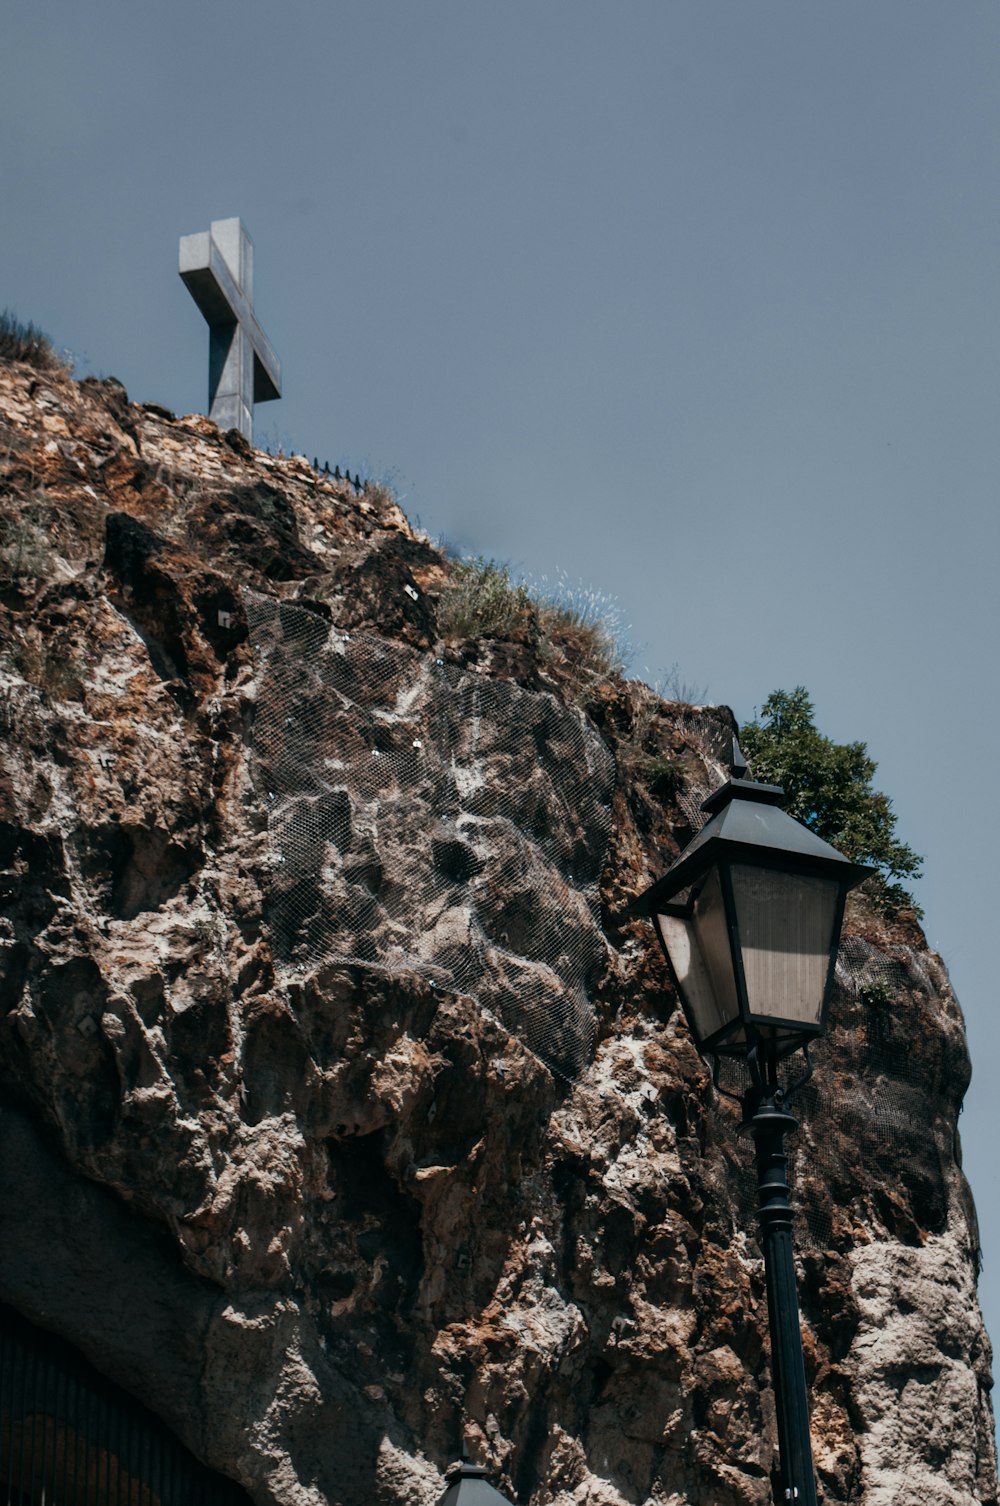 a lamp post on a rocky cliff